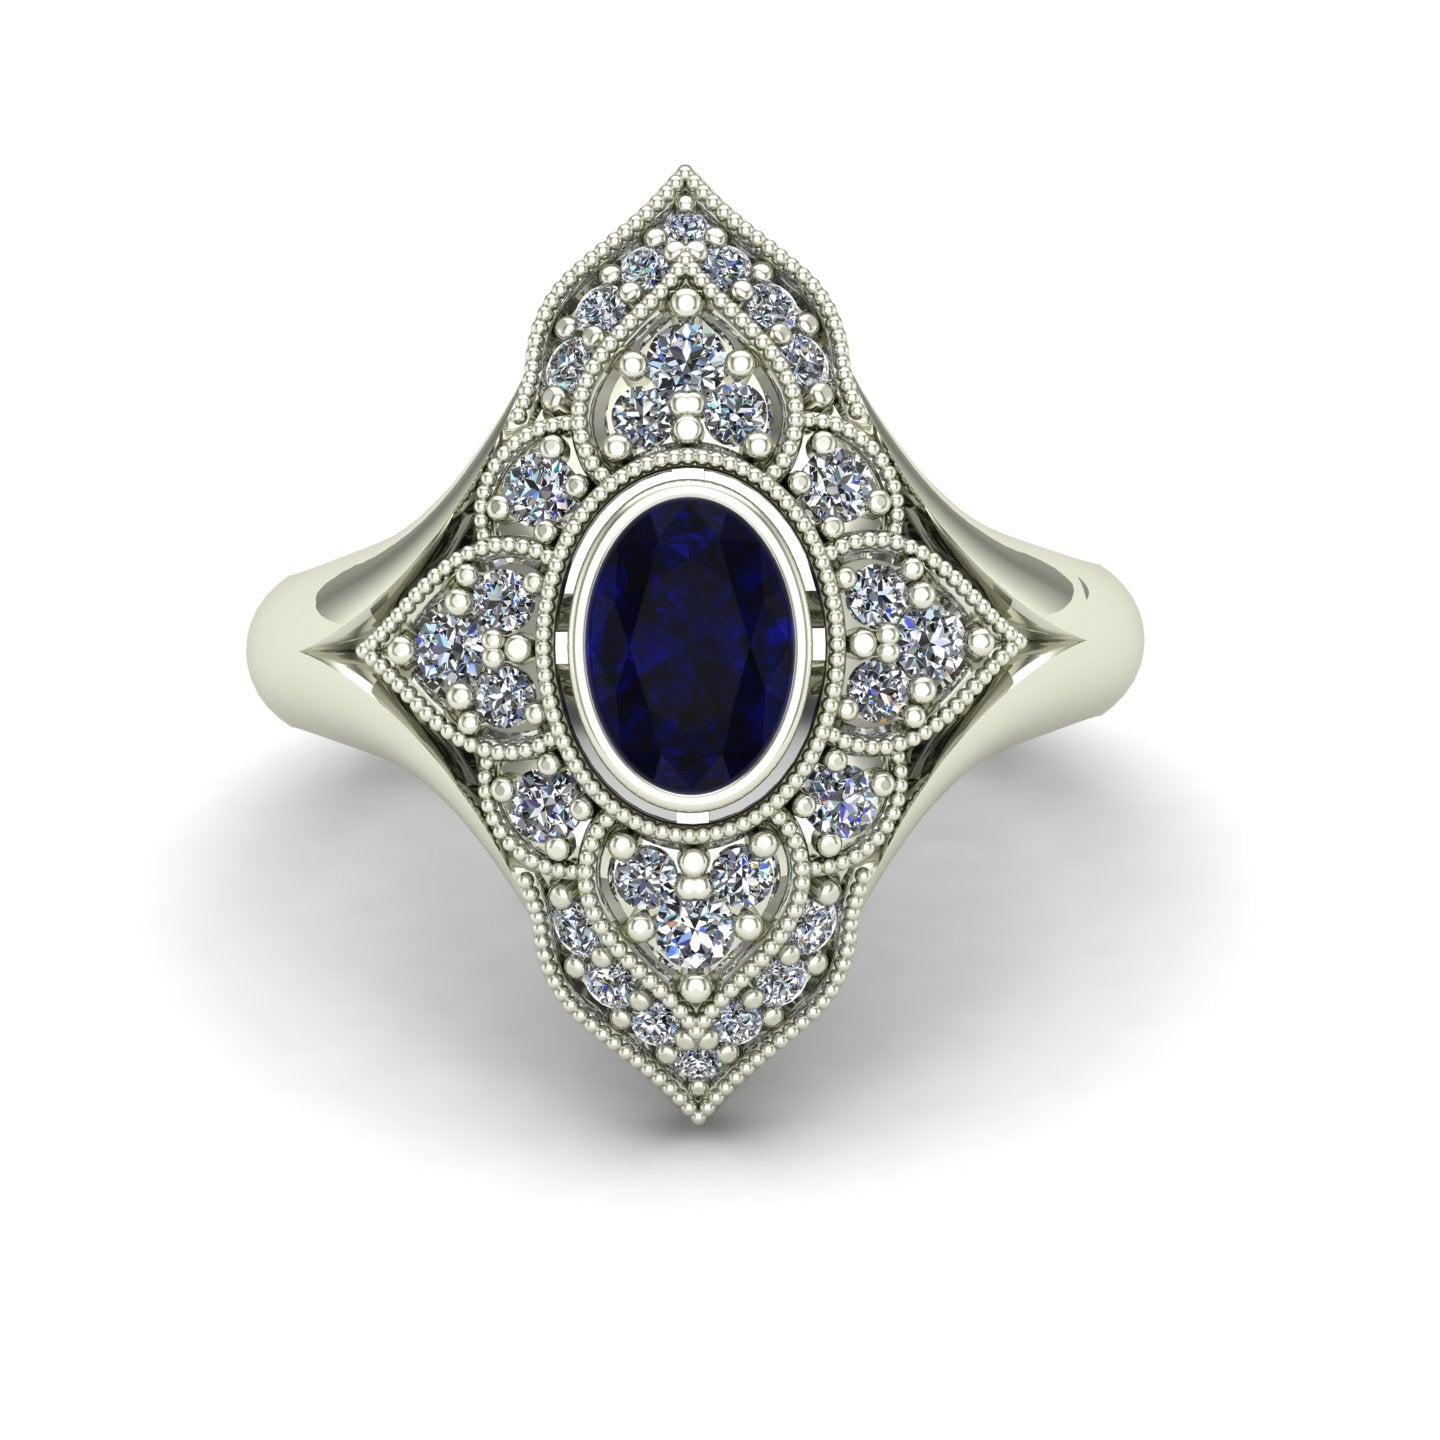 bezel set oval blue sapphire and diamond paneled ring in 14k white gold - Charles Babb Designs - top view